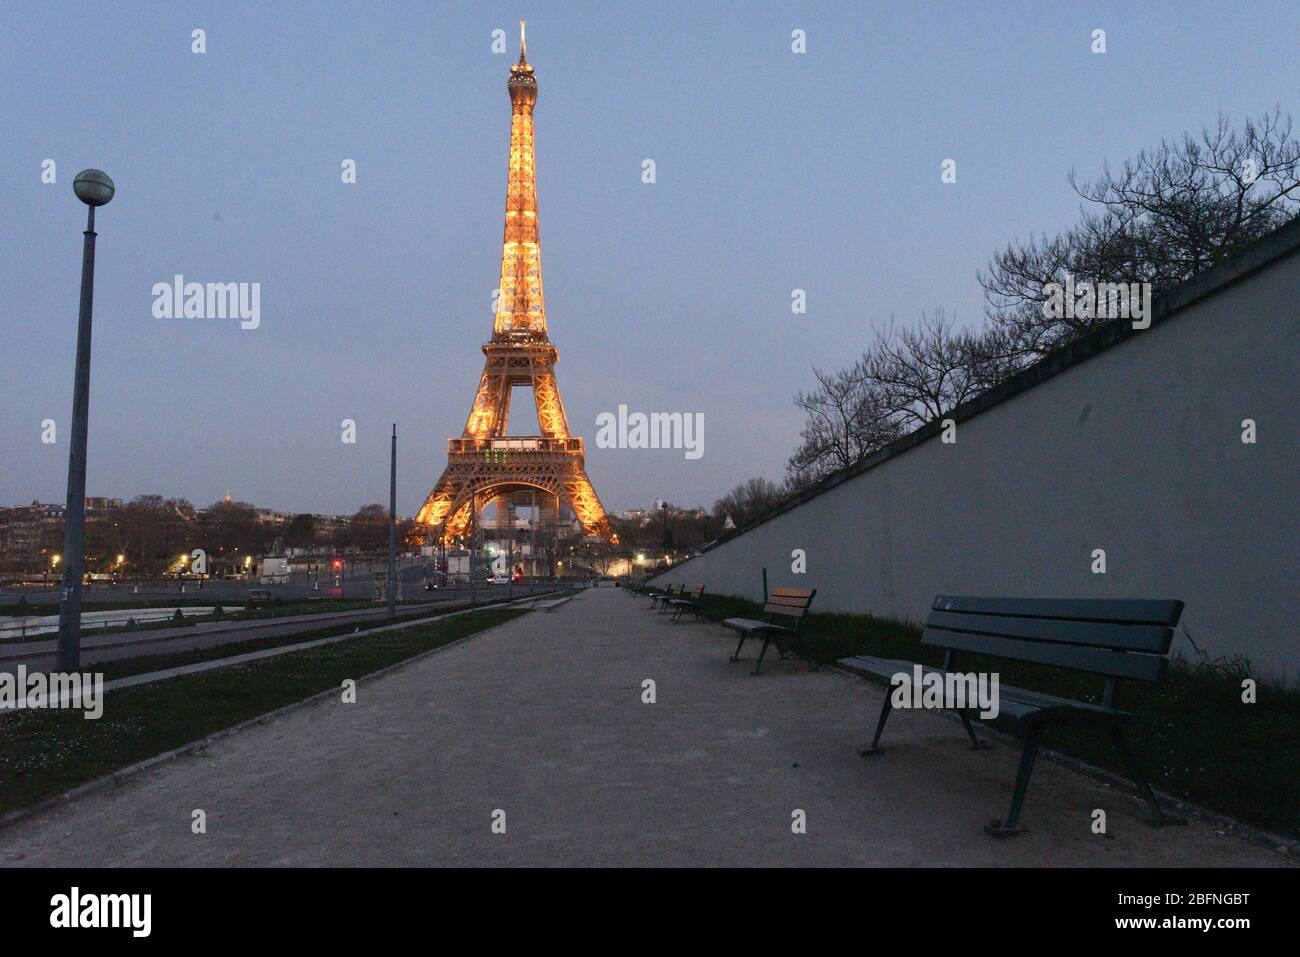 *** STRICTLY NO SALES TO FRENCH MEDIA OR PUBLISHERS - RIGHTS RESERVED *** March 26, 2020 - Paris, France: View on the Trocadero esplanade and Eiffel tower, a major tourist landmark, which is completely desert during the lockdown against the spread of coronavirus. Stock Photo